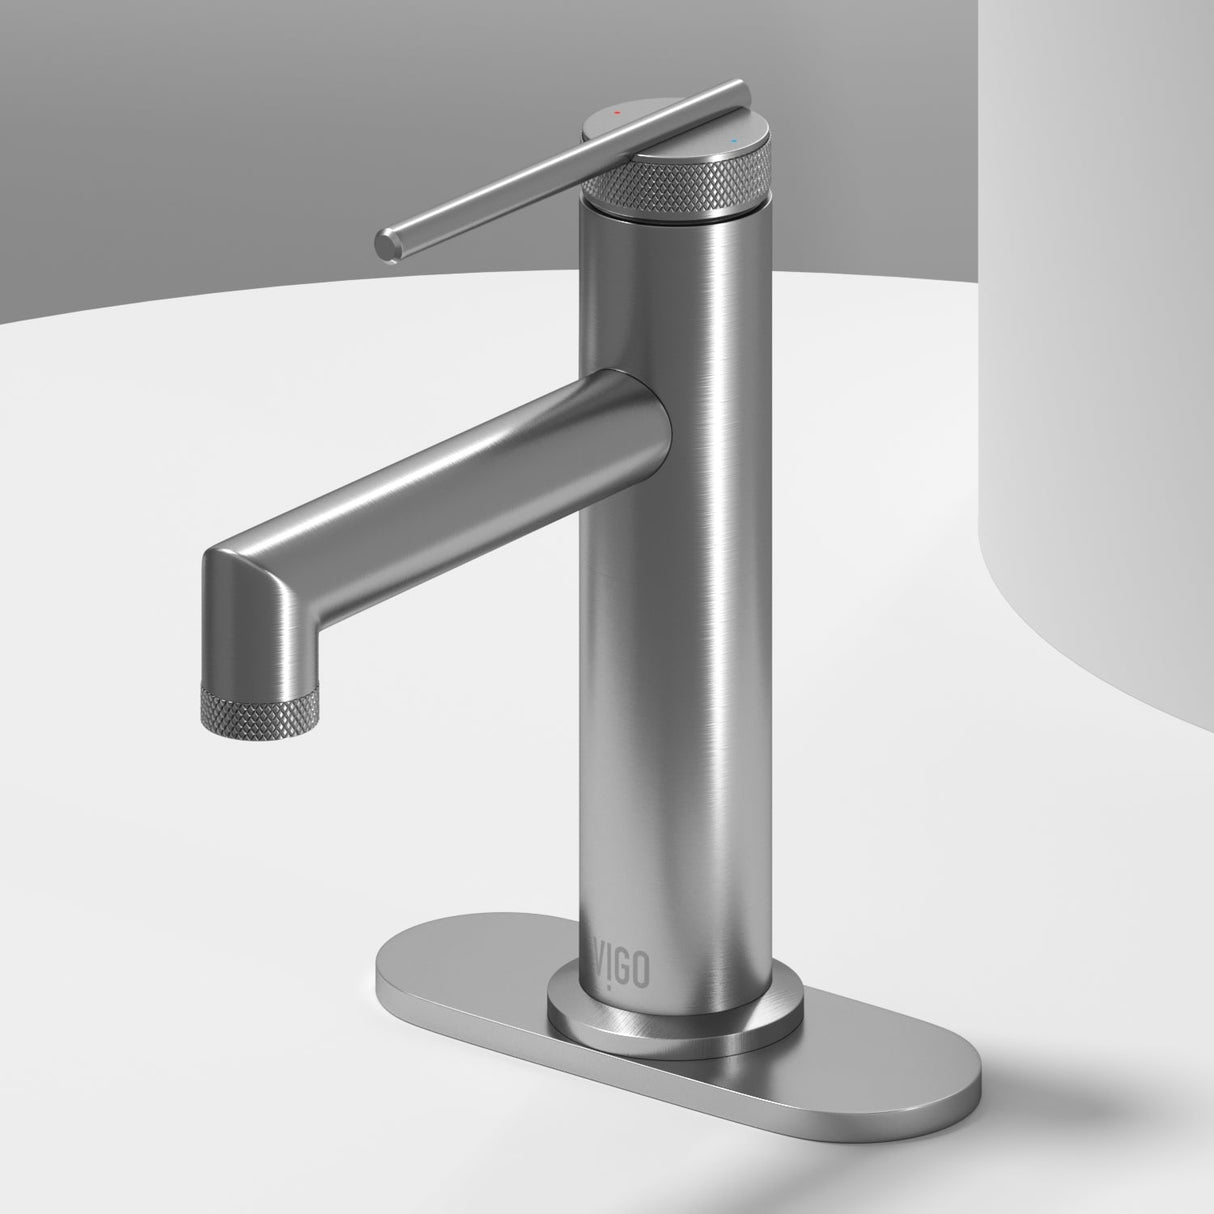 Sterling Single Hole Single-Handle Bathroom Faucet with Deck Plate in Brushed Nickel VG01049BNK1